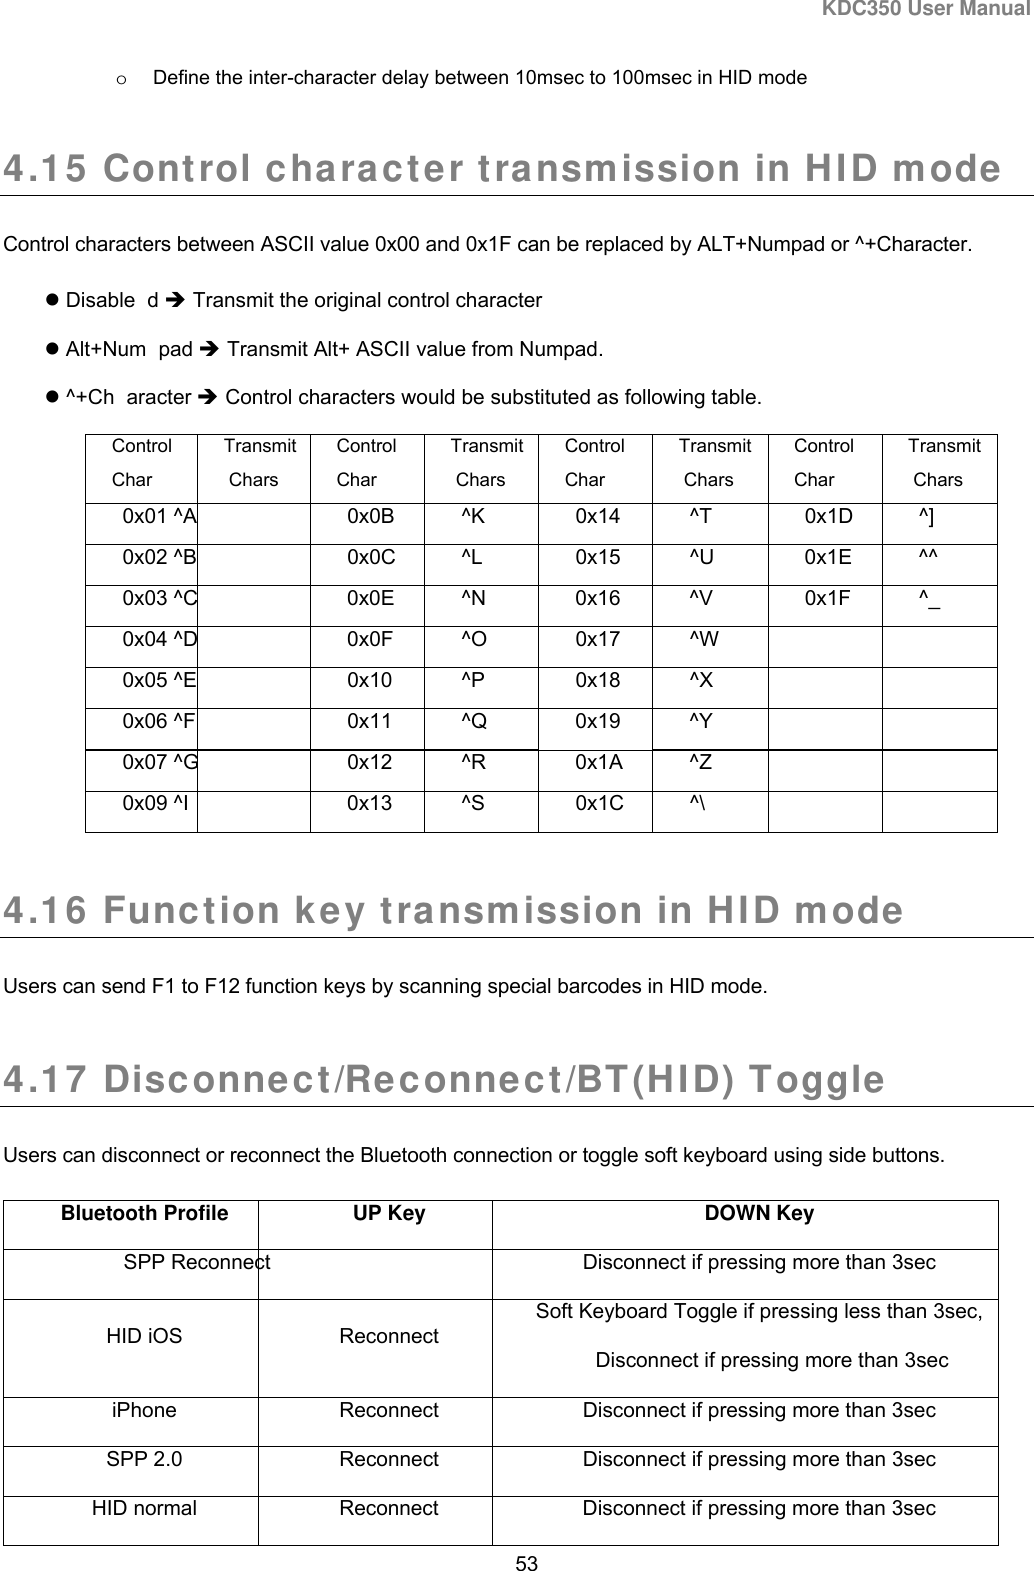 KDC350 User Manual  53  o  Define the inter-character delay between 10msec to 100msec in HID mode  4.15 Control character transmission in HID mode  Control characters between ASCII value 0x00 and 0x1F can be replaced by ALT+Numpad or ^+Character.   Disable d  Transmit the original control character  Alt+Num pad  Transmit Alt+ ASCII value from Numpad.  ^+Ch aracter  Control characters would be substituted as following table. Control  Char Transmit  Chars Control  Char Transmit Chars Control  Char Transmit  Chars Control  Char Transmit Chars 0x01 ^A  0x0B ^K  0x14 ^T  0x1D ^] 0x02 ^B  0x0C ^L  0x15 ^U  0x1E ^^ 0x03 ^C  0x0E ^N  0x16 ^V  0x1F ^_ 0x04 ^D  0x0F ^O  0x17 ^W     0x05 ^E  0x10 ^P  0x18 ^X     0x06 ^F  0x11 ^Q  0x19 ^Y     0x07 ^G  0x12 ^R  0x1A ^Z     0x09 ^I  0x13 ^S  0x1C ^\      4.16 Function key transmission in HID mode  Users can send F1 to F12 function keys by scanning special barcodes in HID mode.  4.17 Disconnect/Reconnect/BT(HID) Toggle  Users can disconnect or reconnect the Bluetooth connection or toggle soft keyboard using side buttons.  Bluetooth Profile  UP Key  DOWN Key SPP Reconnect  Disconnect if pressing more than 3sec HID iOS  Reconnect Soft Keyboard Toggle if pressing less than 3sec,Disconnect if pressing more than 3sec iPhone  Reconnect  Disconnect if pressing more than 3sec SPP 2.0  Reconnect  Disconnect if pressing more than 3sec HID normal  Reconnect  Disconnect if pressing more than 3sec 